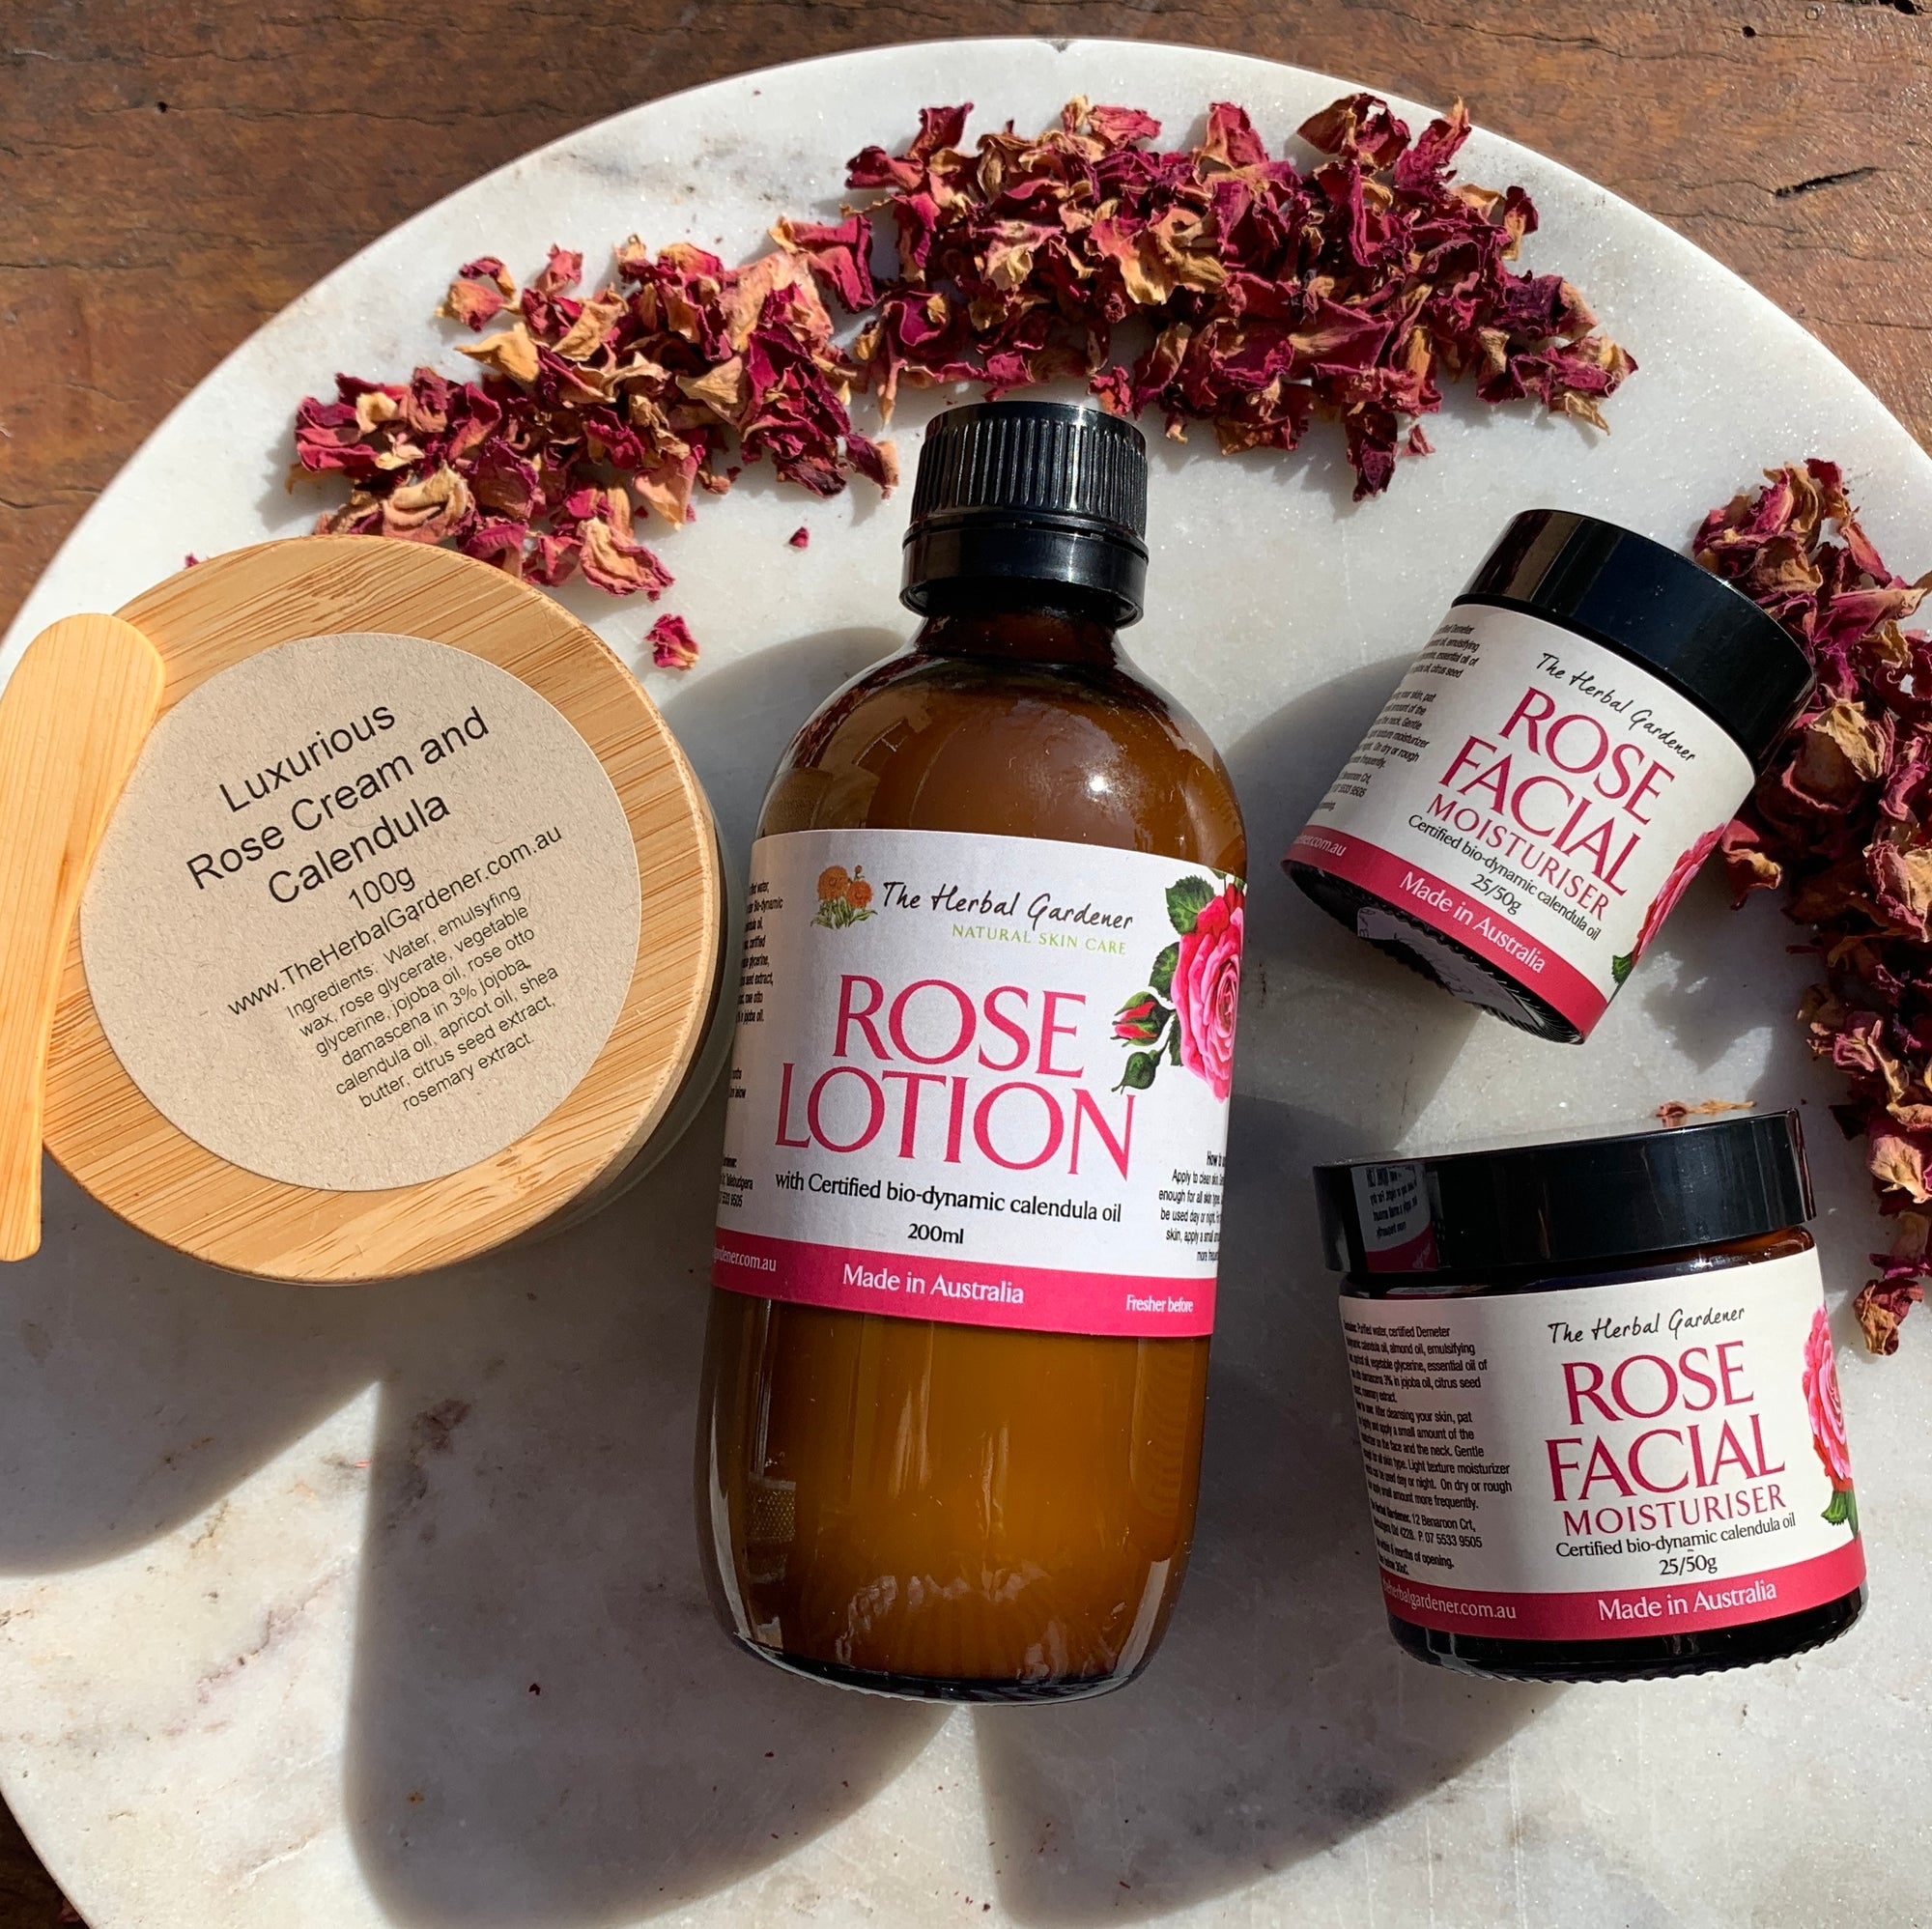 Ideal Rose products -Save $15:00